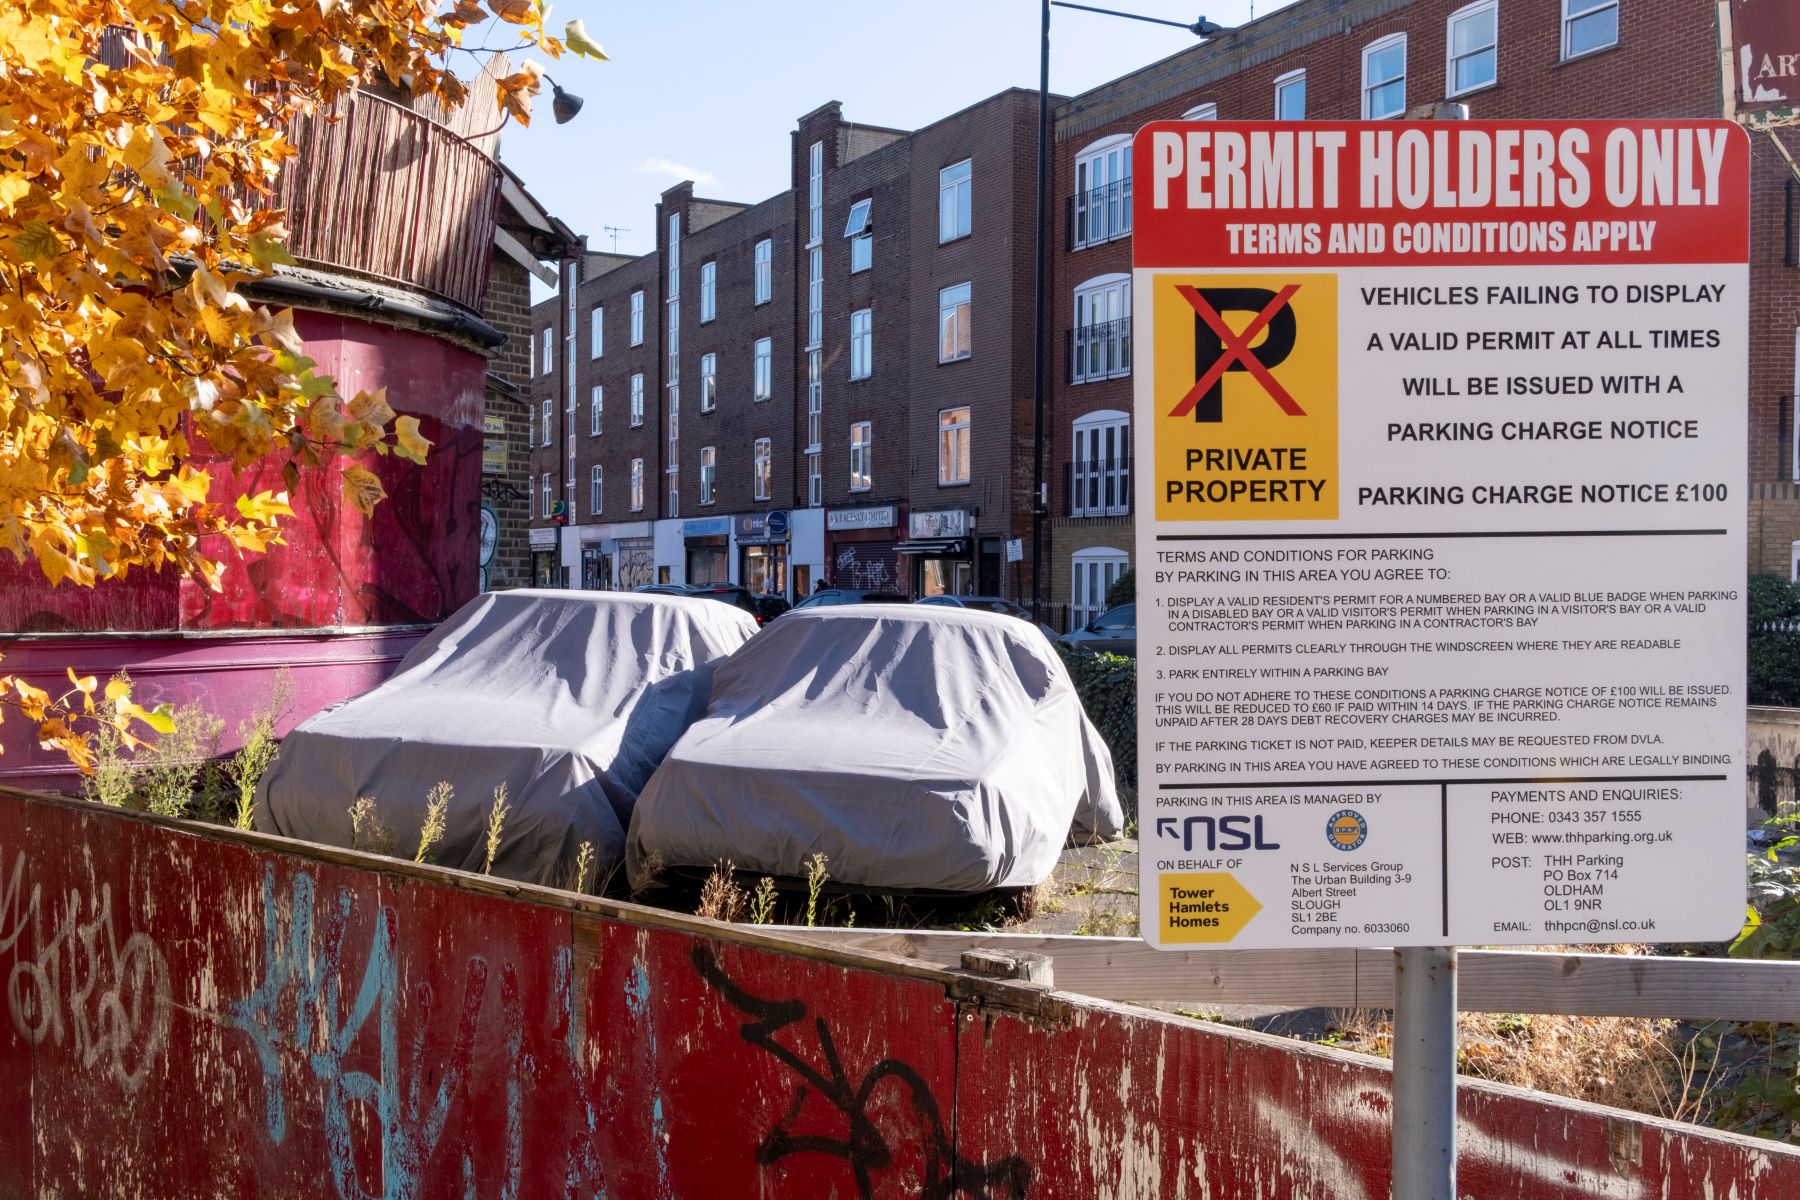 Two covered cars parked on private and personal property with a permit sign in London, England